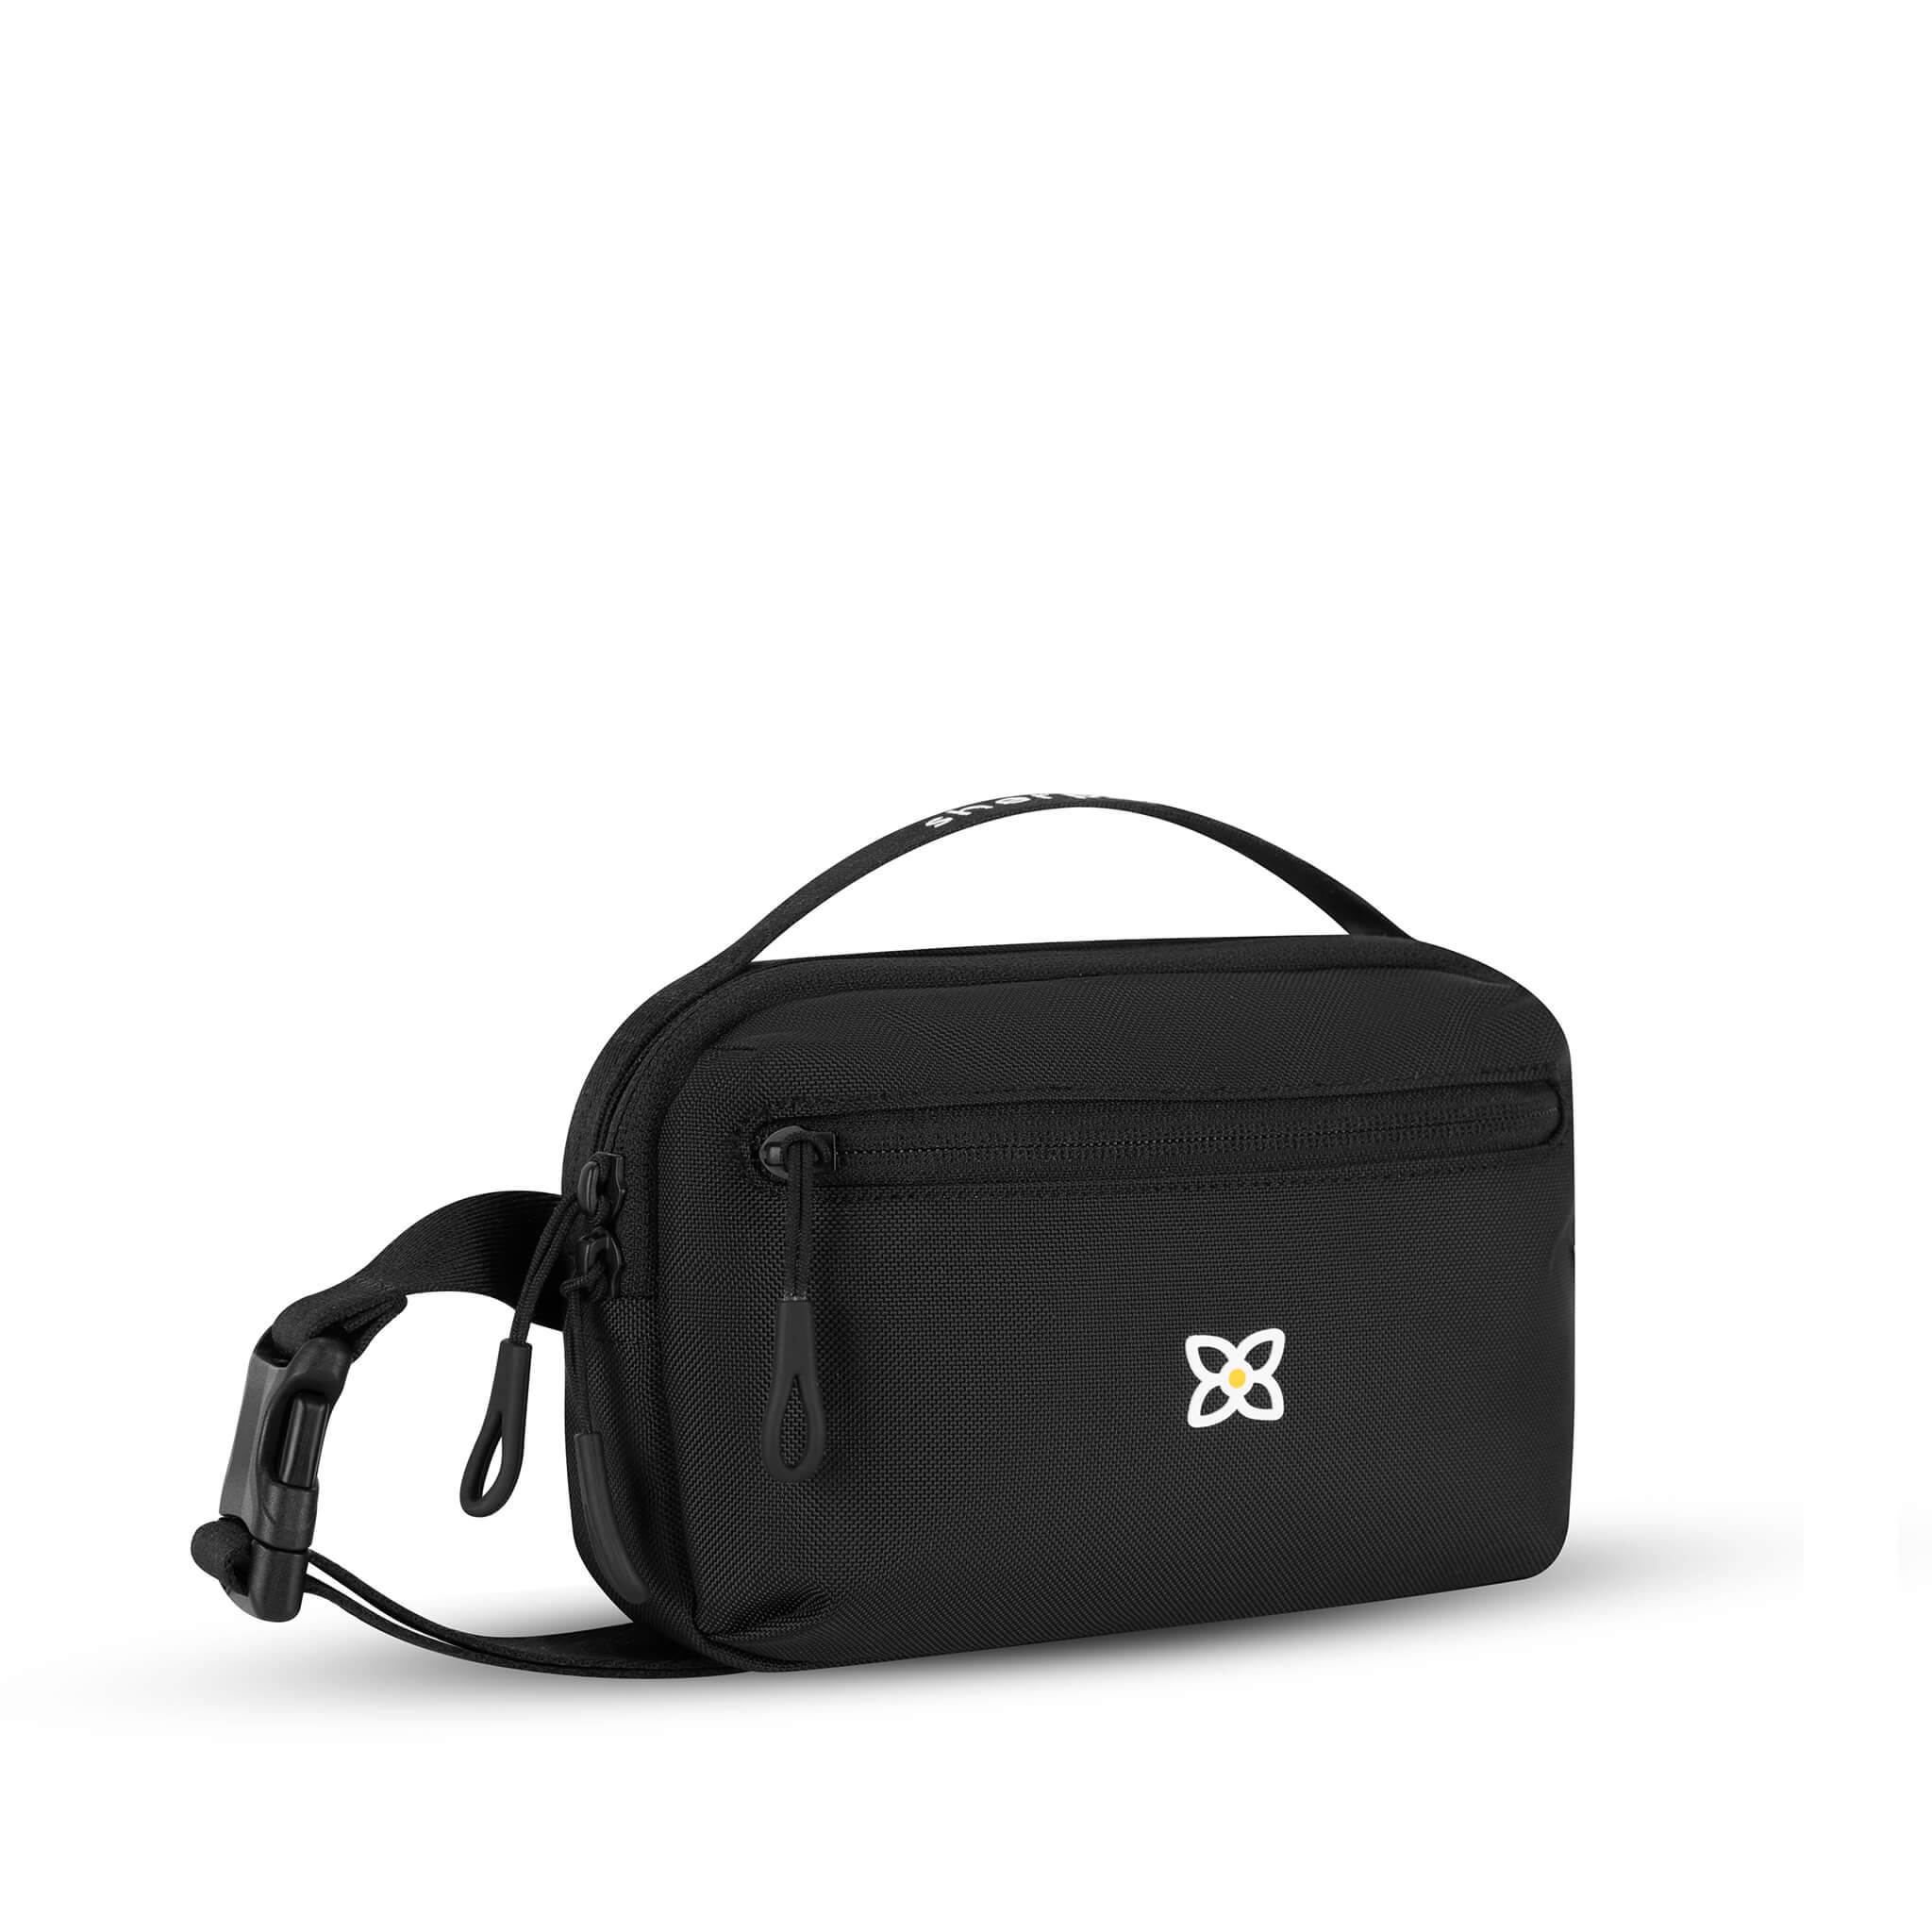 Angled front view of Sherpani’s fanny pack, the Hyk in Raven. The bag is entirely black. There is an external zipper pocket on the front of the bag. Easy-pull zippers are accented in black. The fanny pack features an adjustable strap with a buckle.